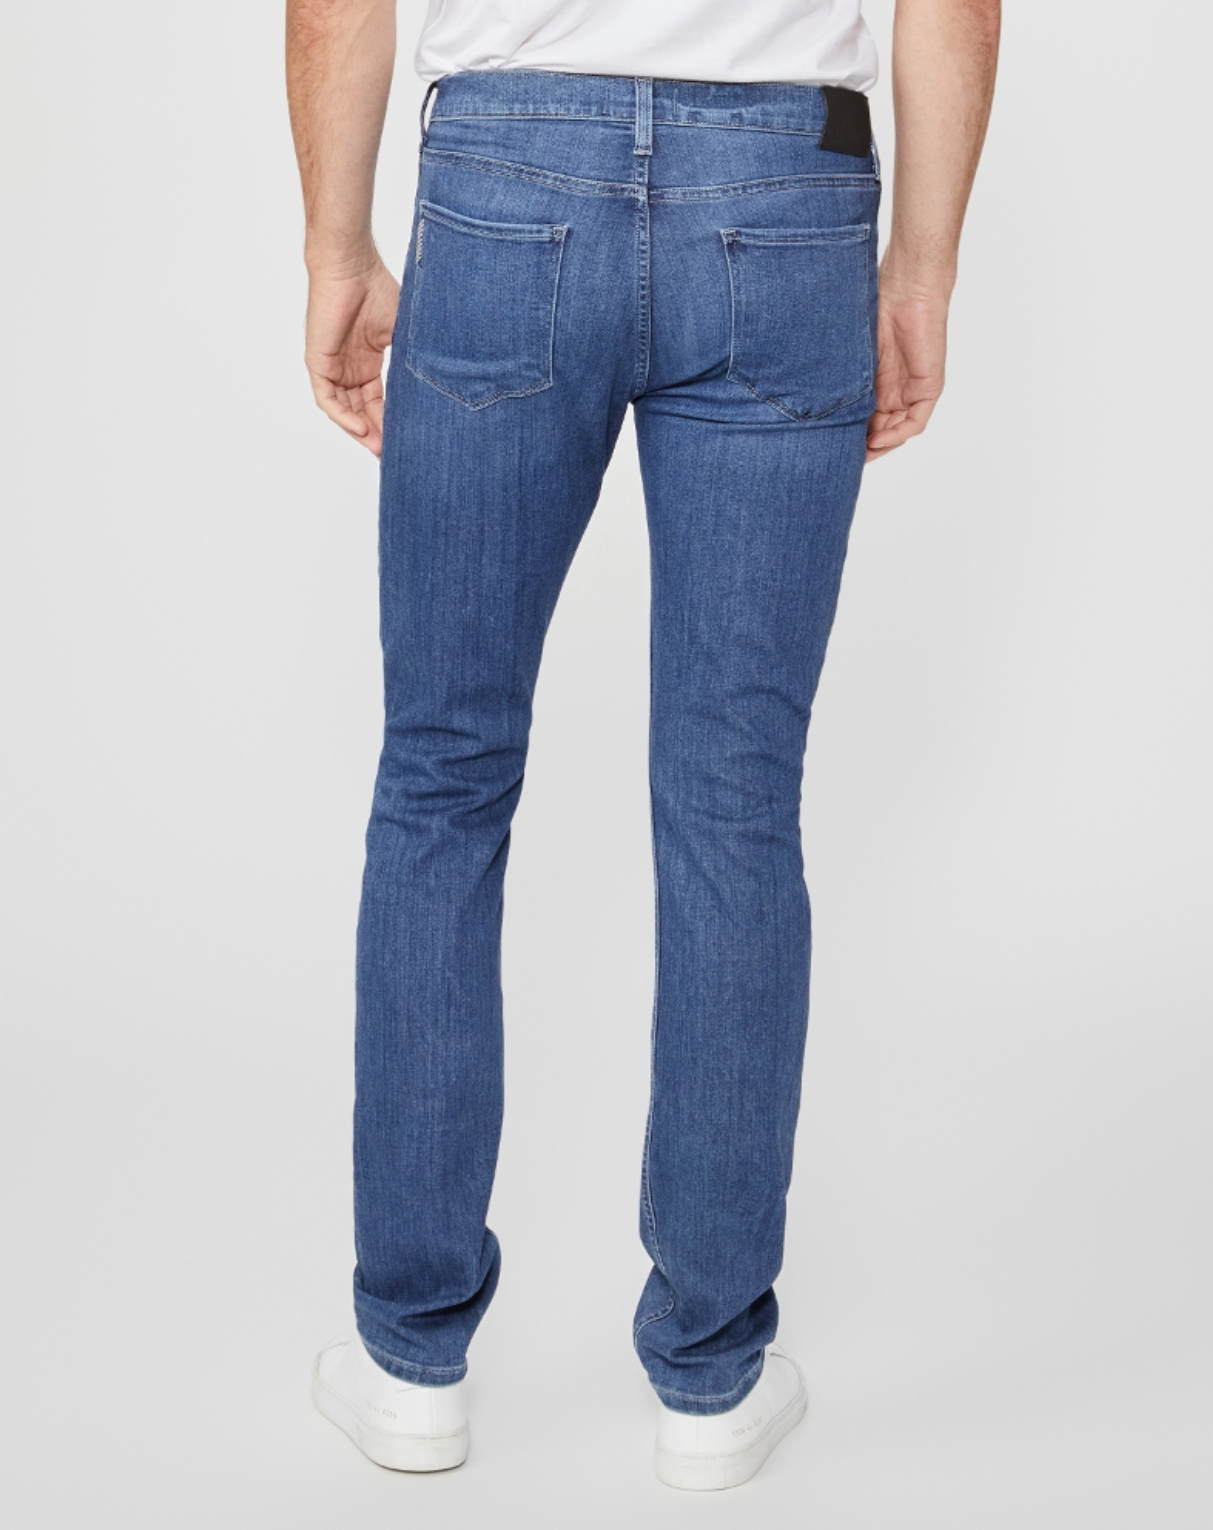 waist down rear view of the federal slim straight jean from paige in redding blue